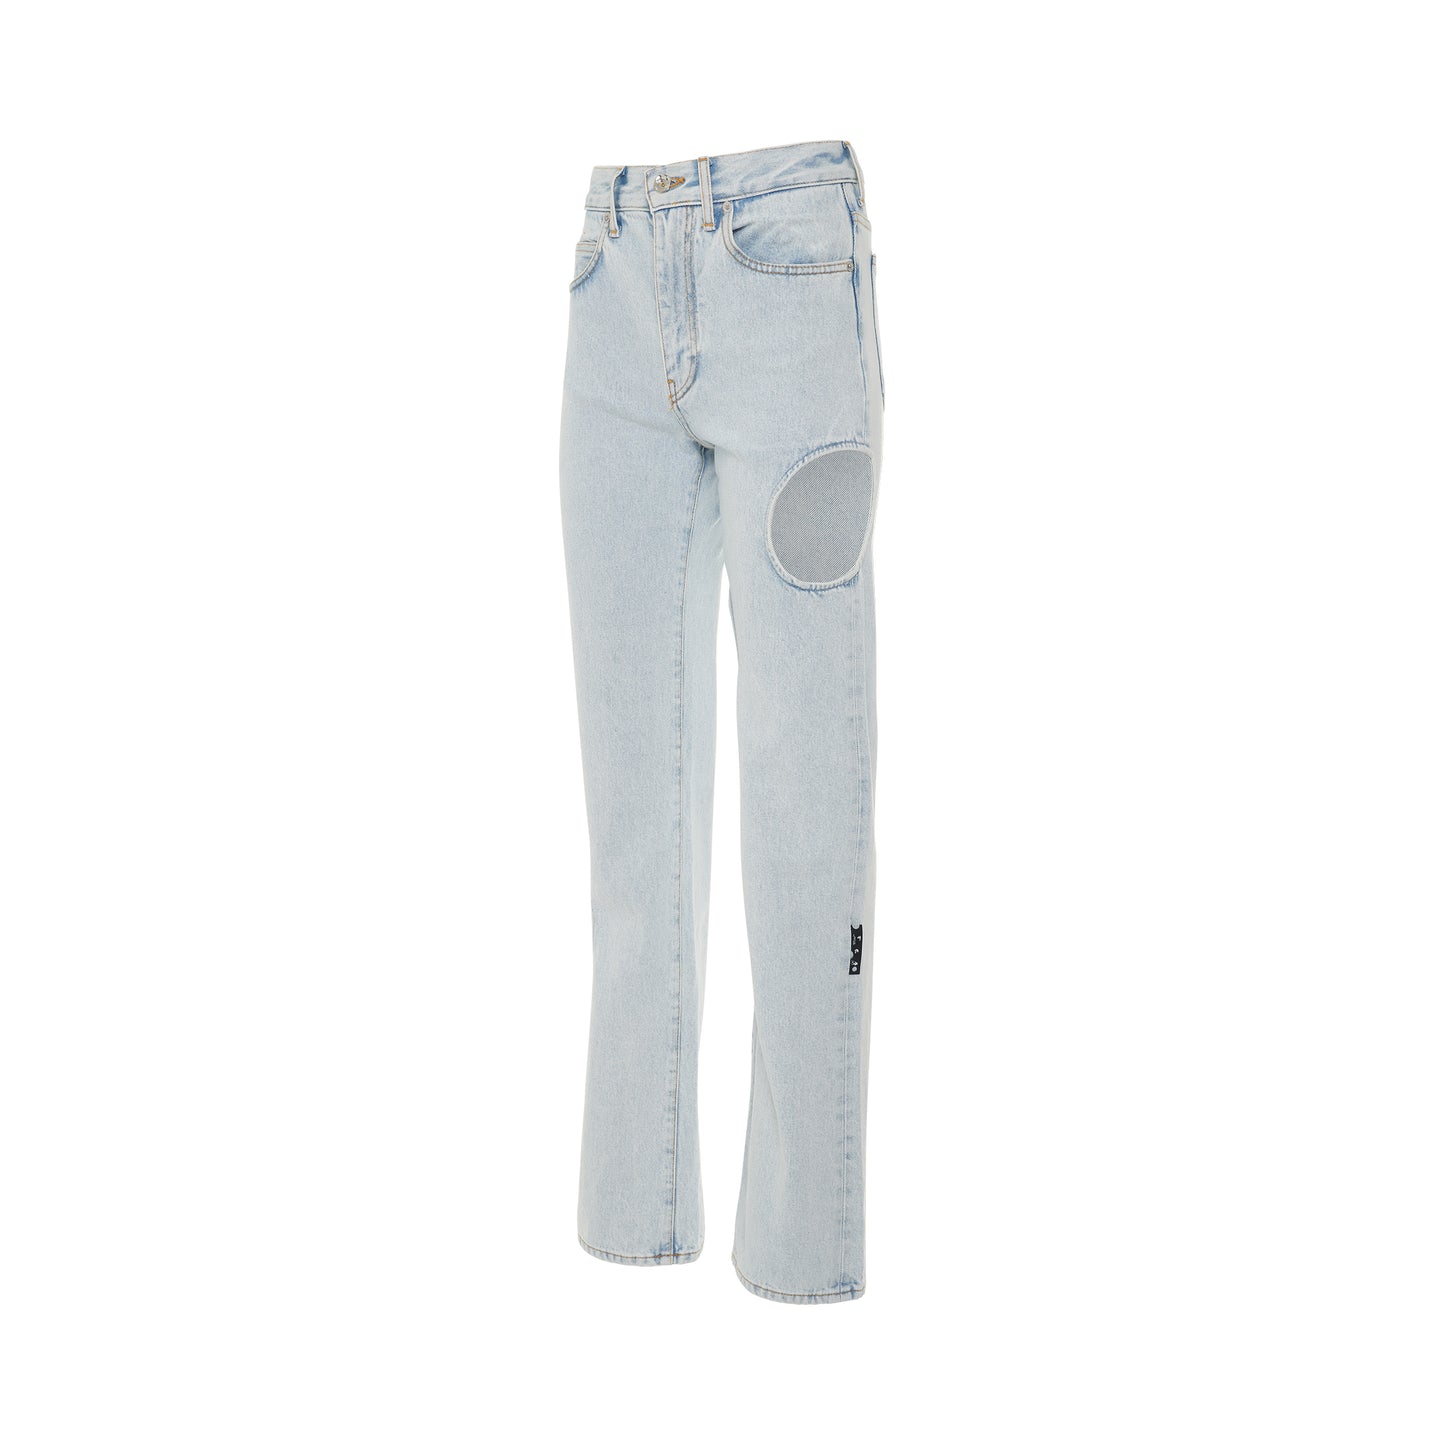 Meteor Cool Baggy Jeans in Light Blue